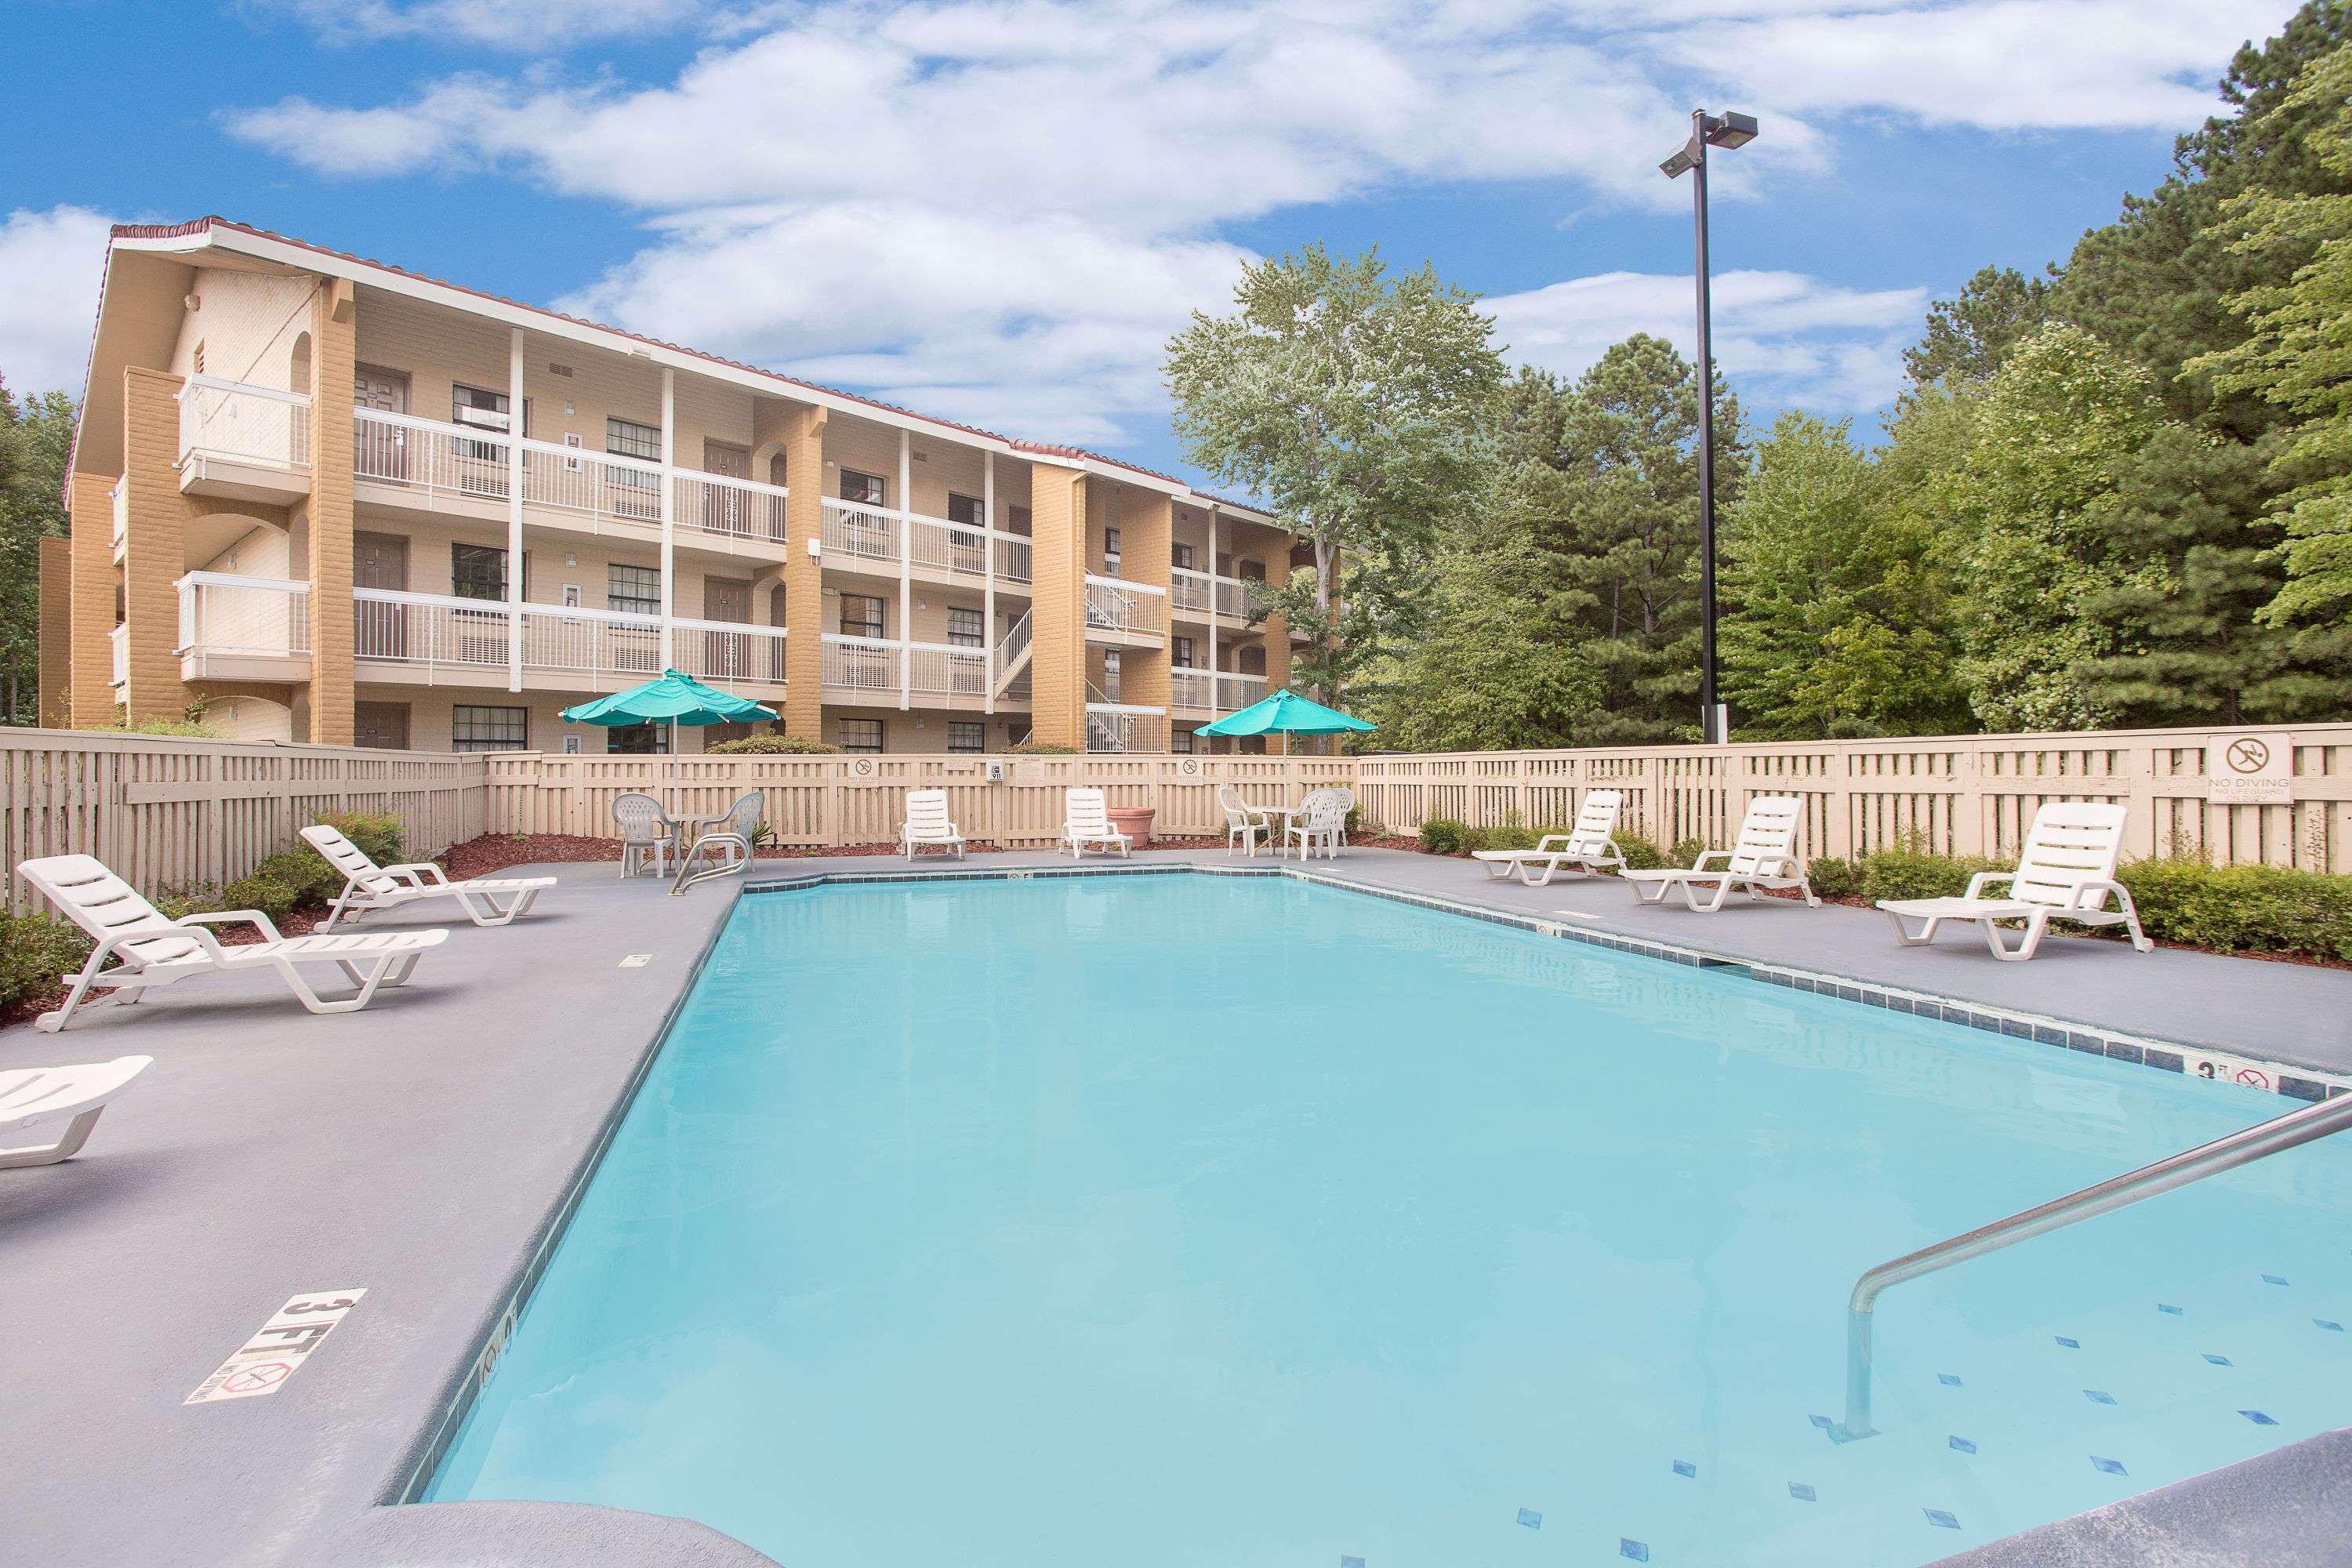 Super 8 By Wyndham Austell/Six Flags Hotel Exterior photo